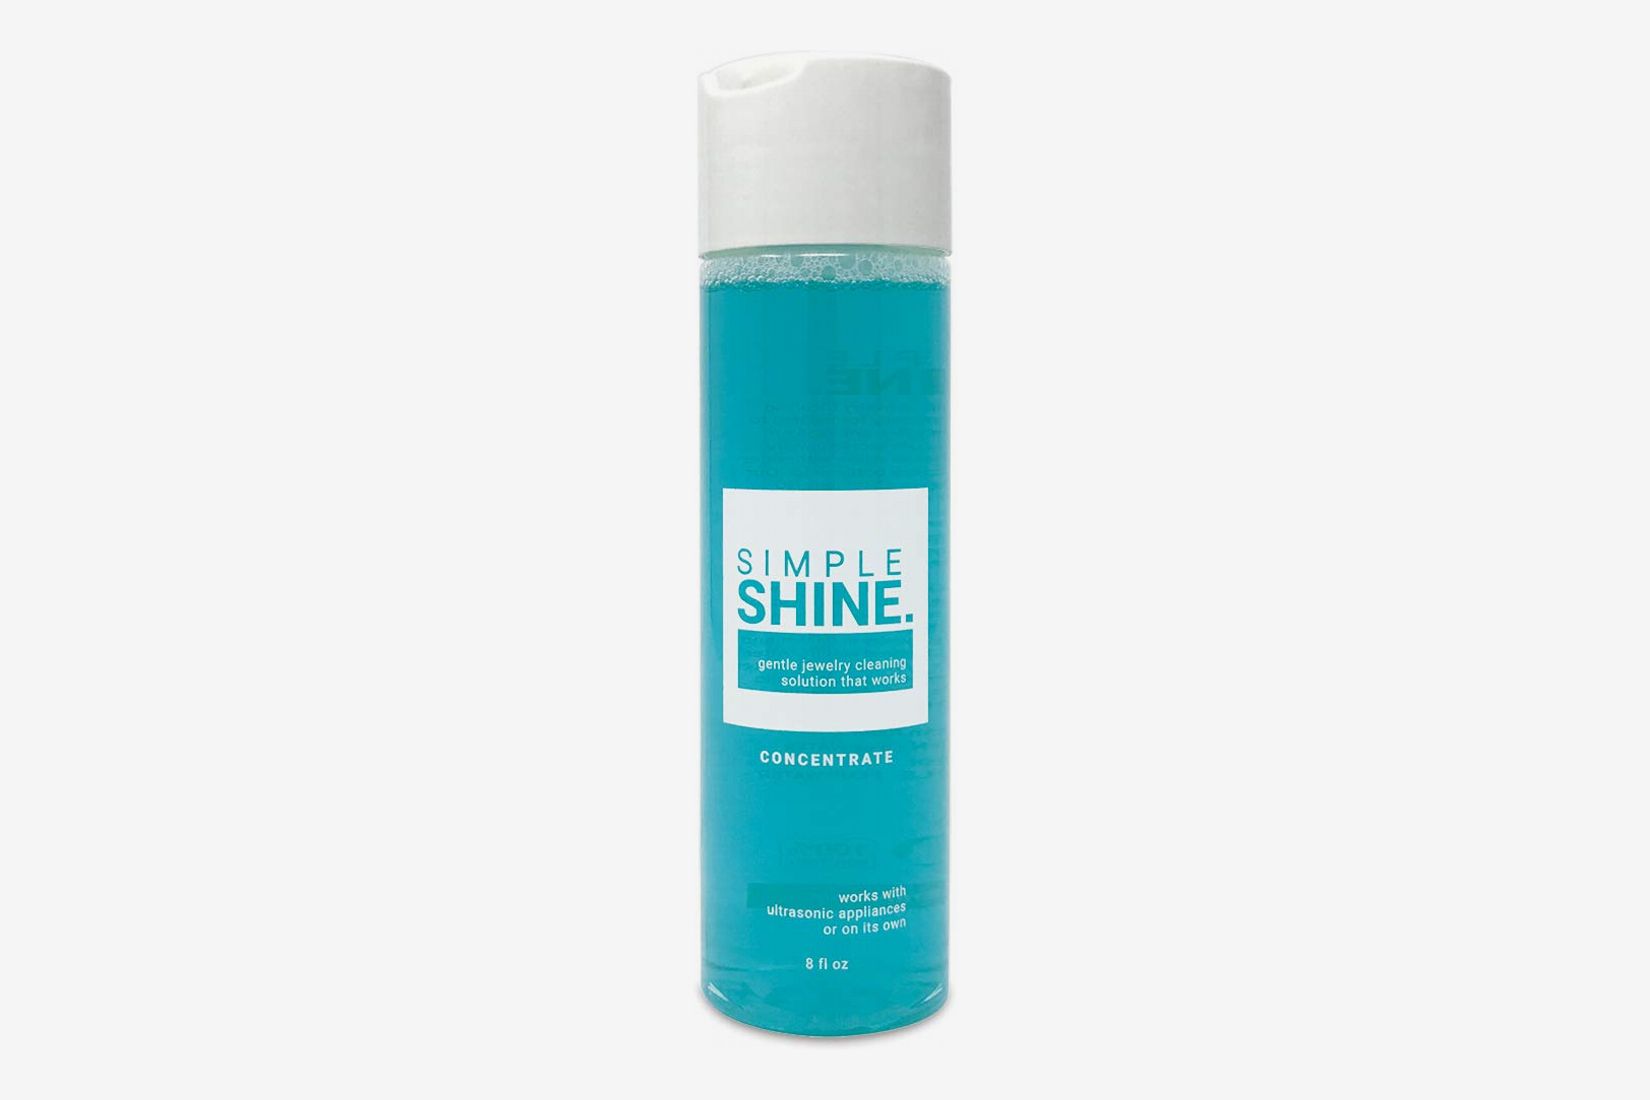 Buy Simple Shine. Gentle Jewelry Cleaner Concentrate, 4 oz Online